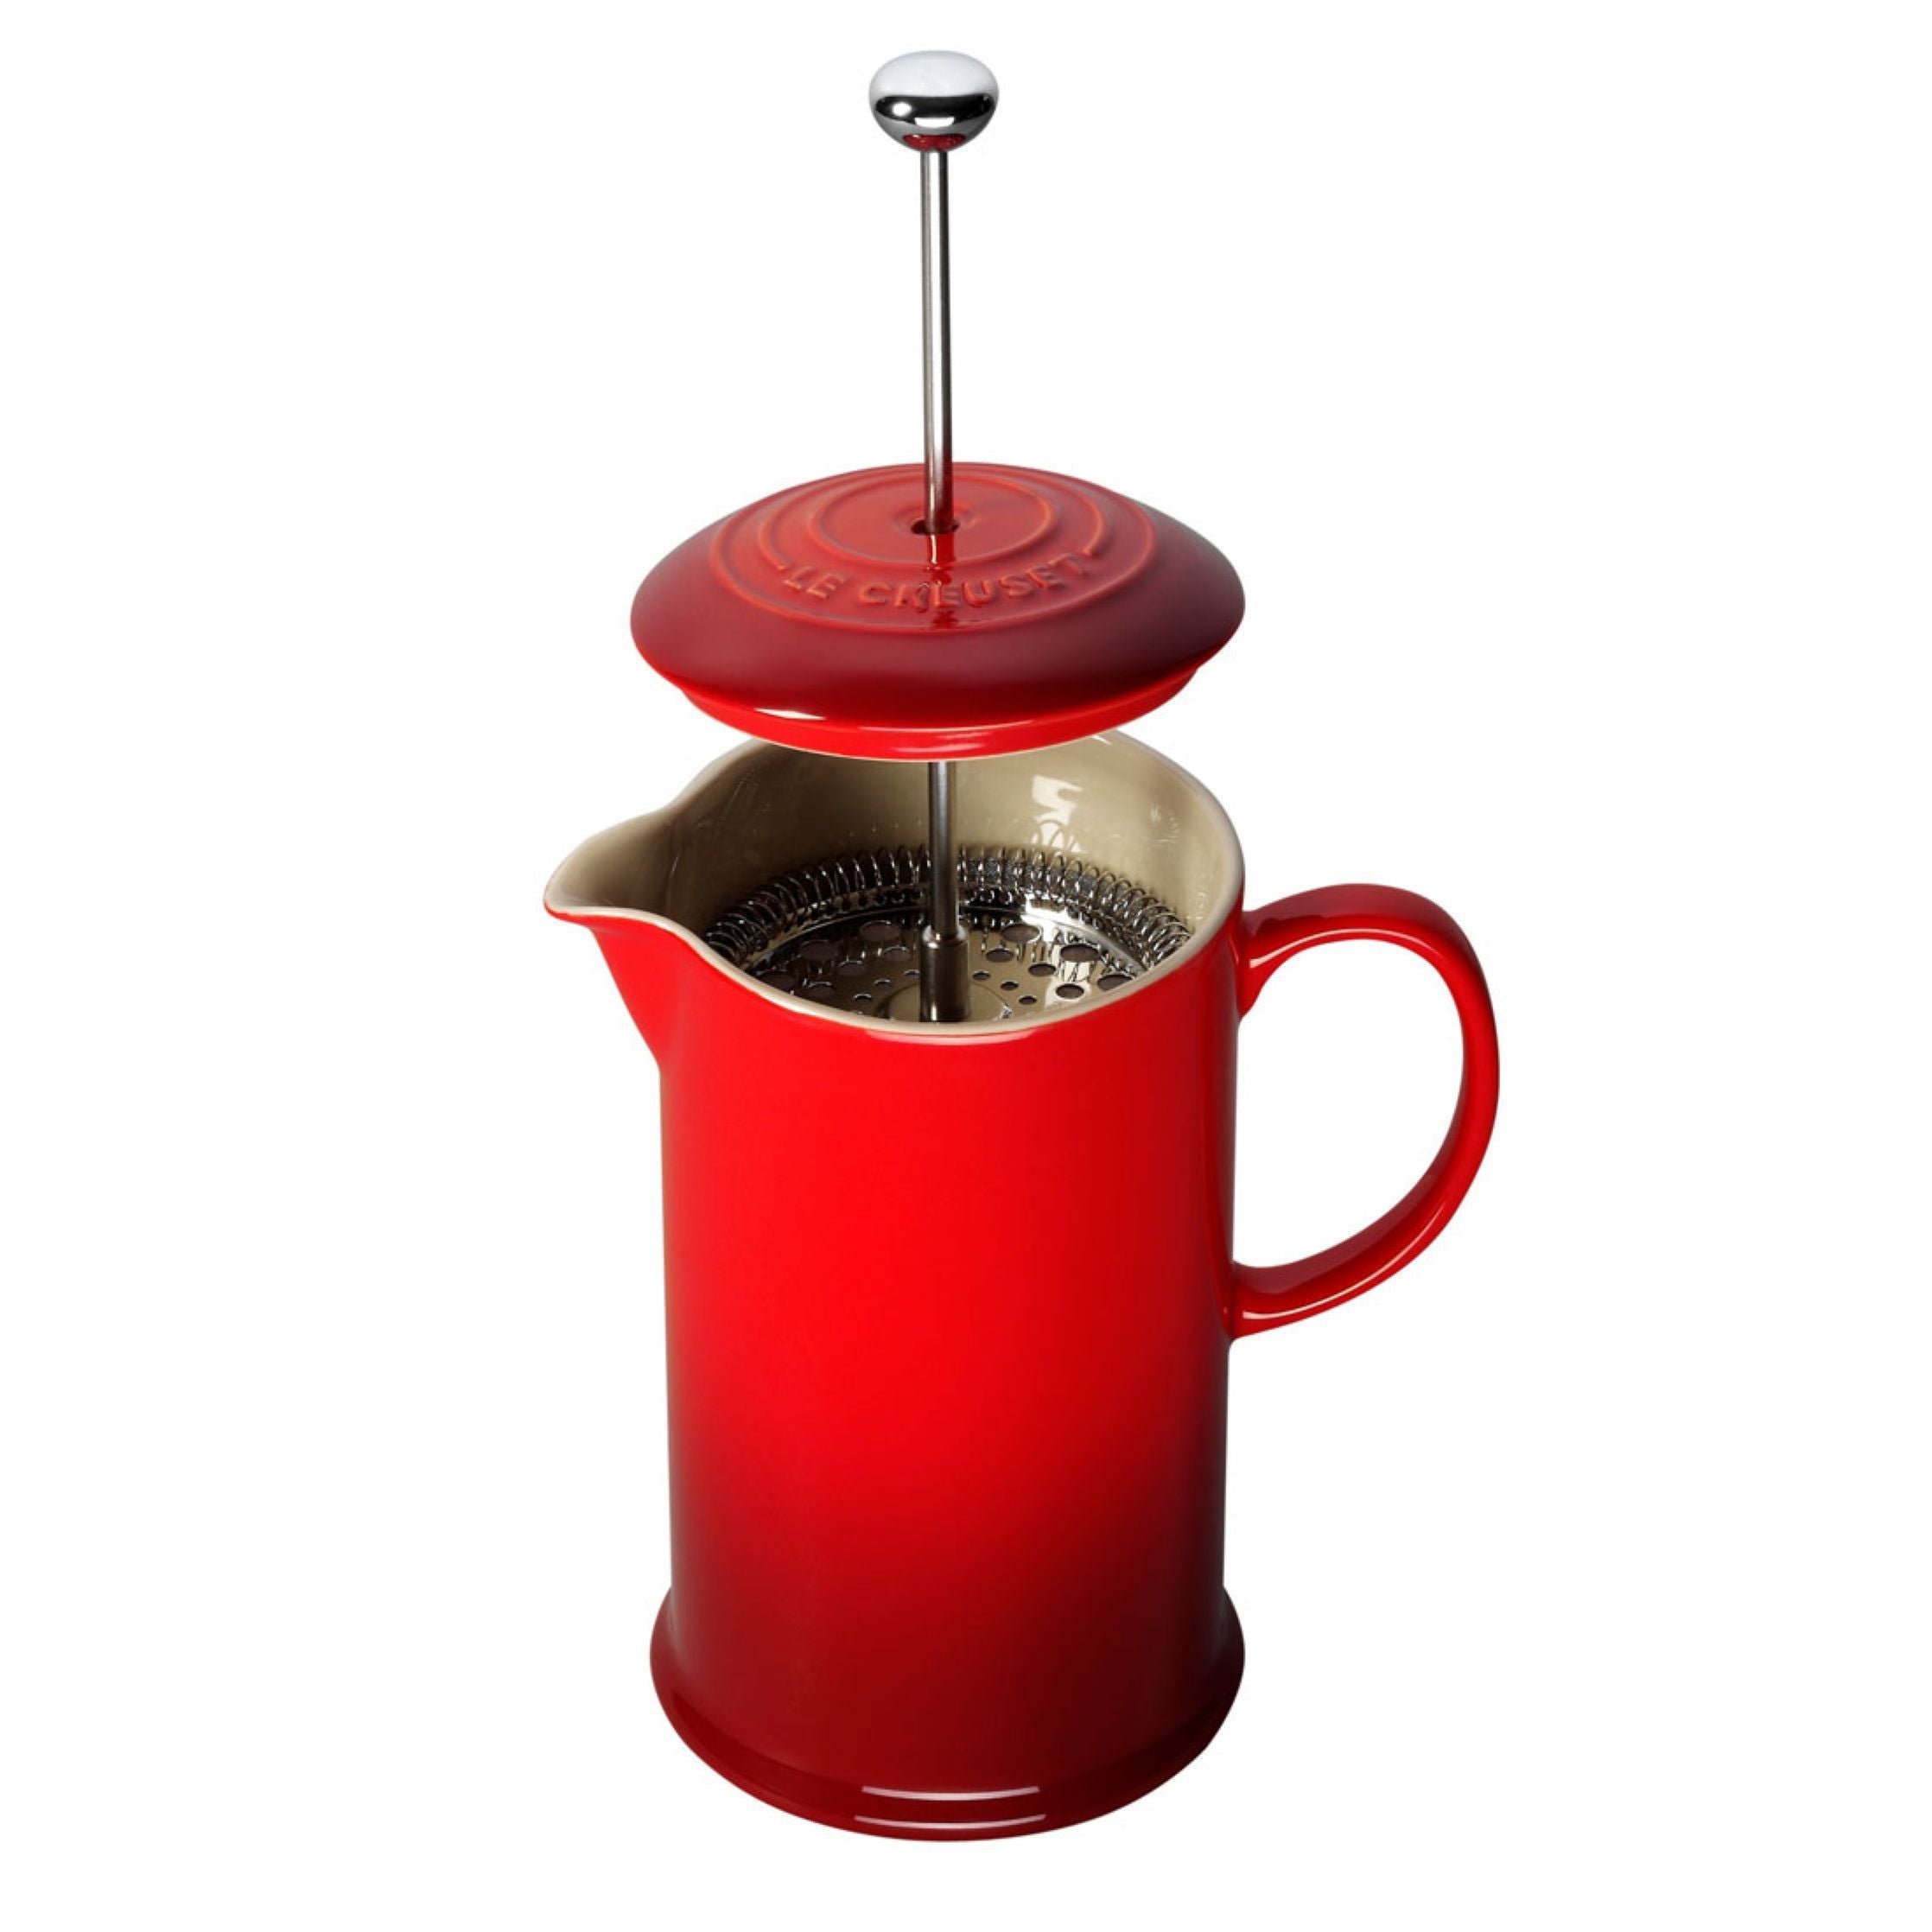 Le Creuset Coffee Maker 1 L, Cherry Red